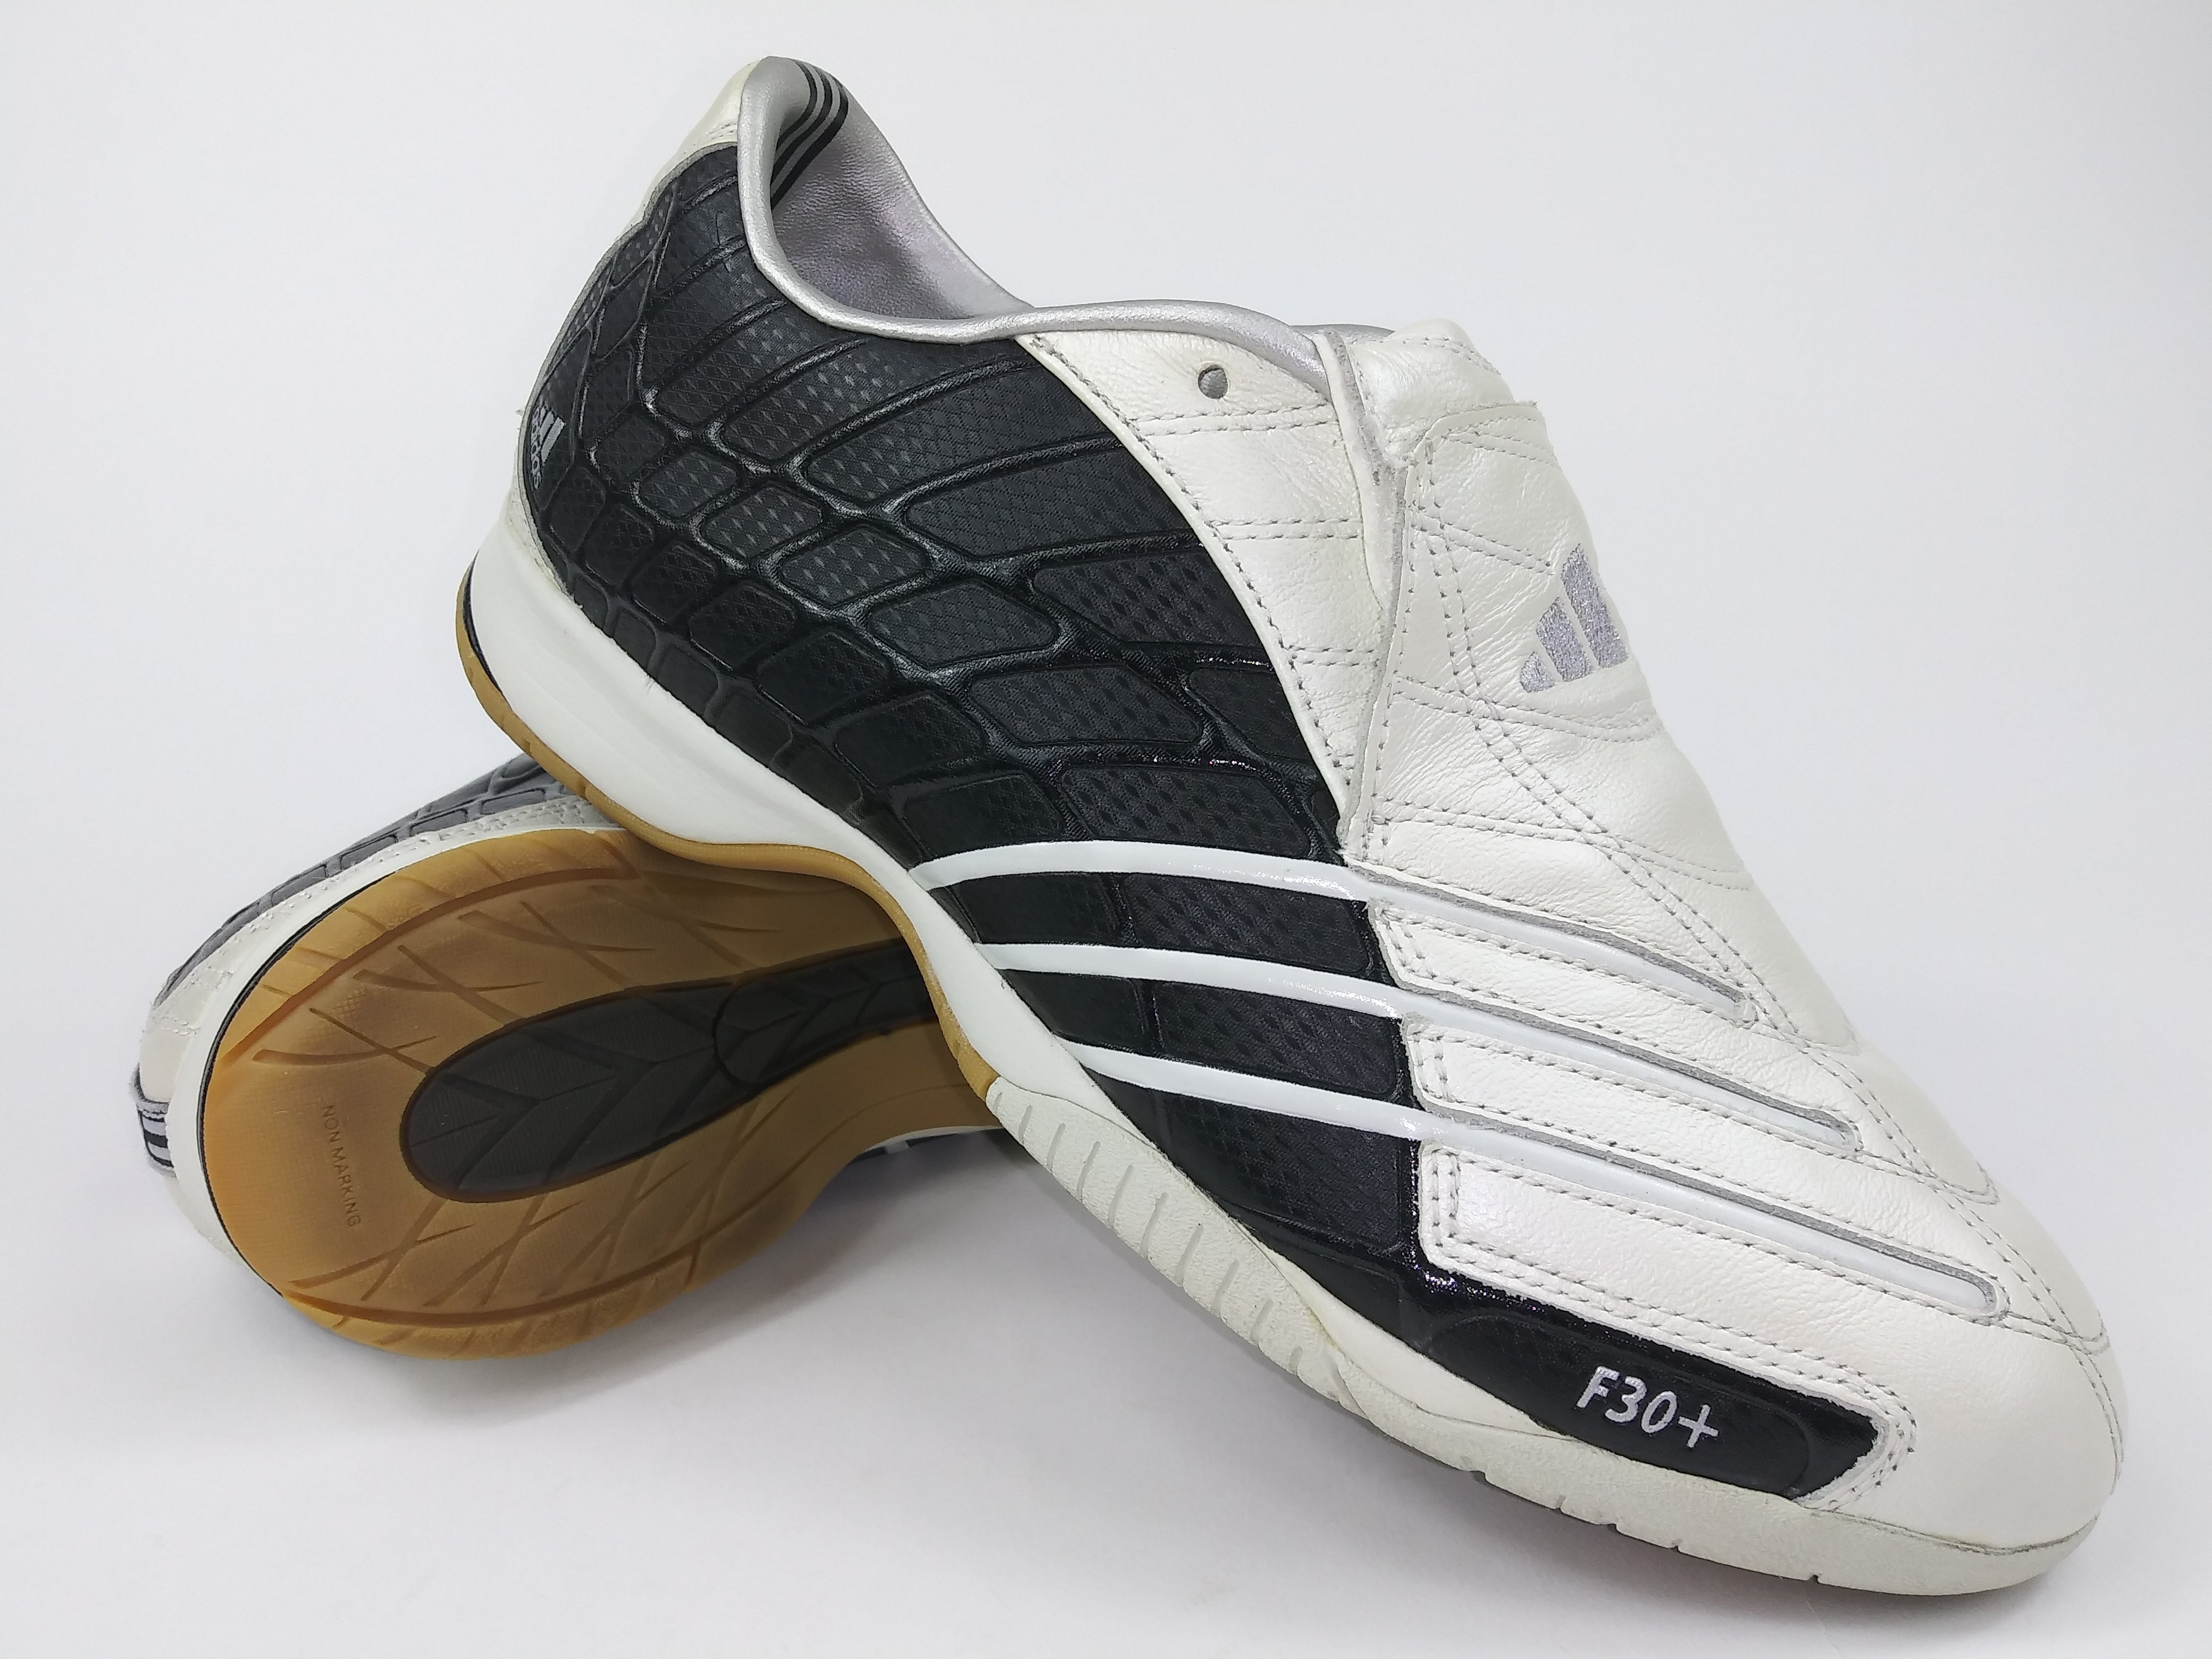 Adidas F30+ Spider Indoor Soccer Shoes 